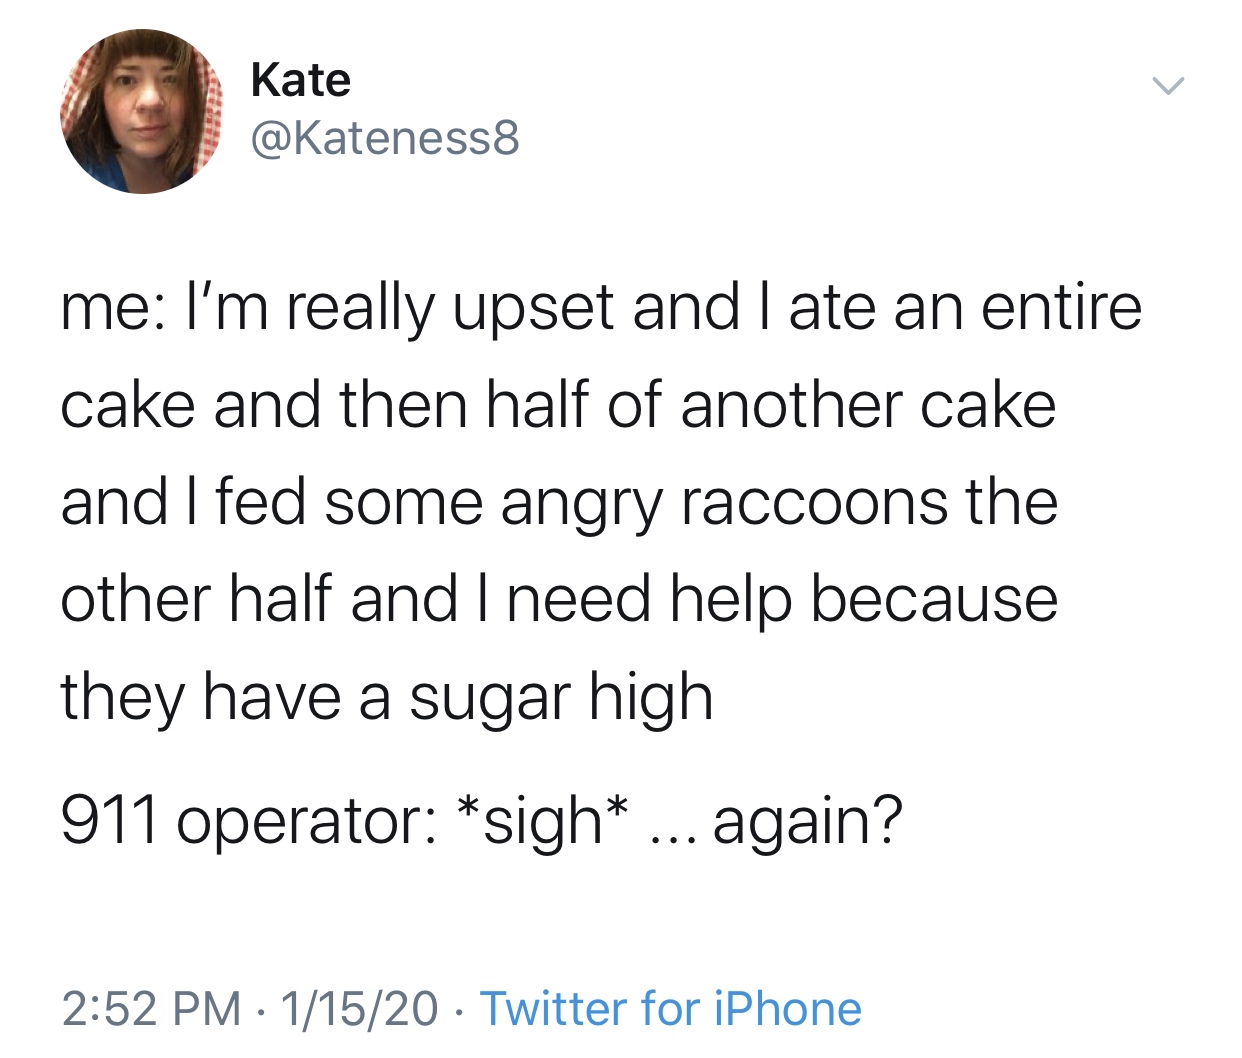 angle - Kate me I'm really upset and late an entire cake and then half of another cake and I fed some angry raccoons the other half and I need help because they have a sugar high 911 operator sigh ... again? 11520 Twitter for iPhone